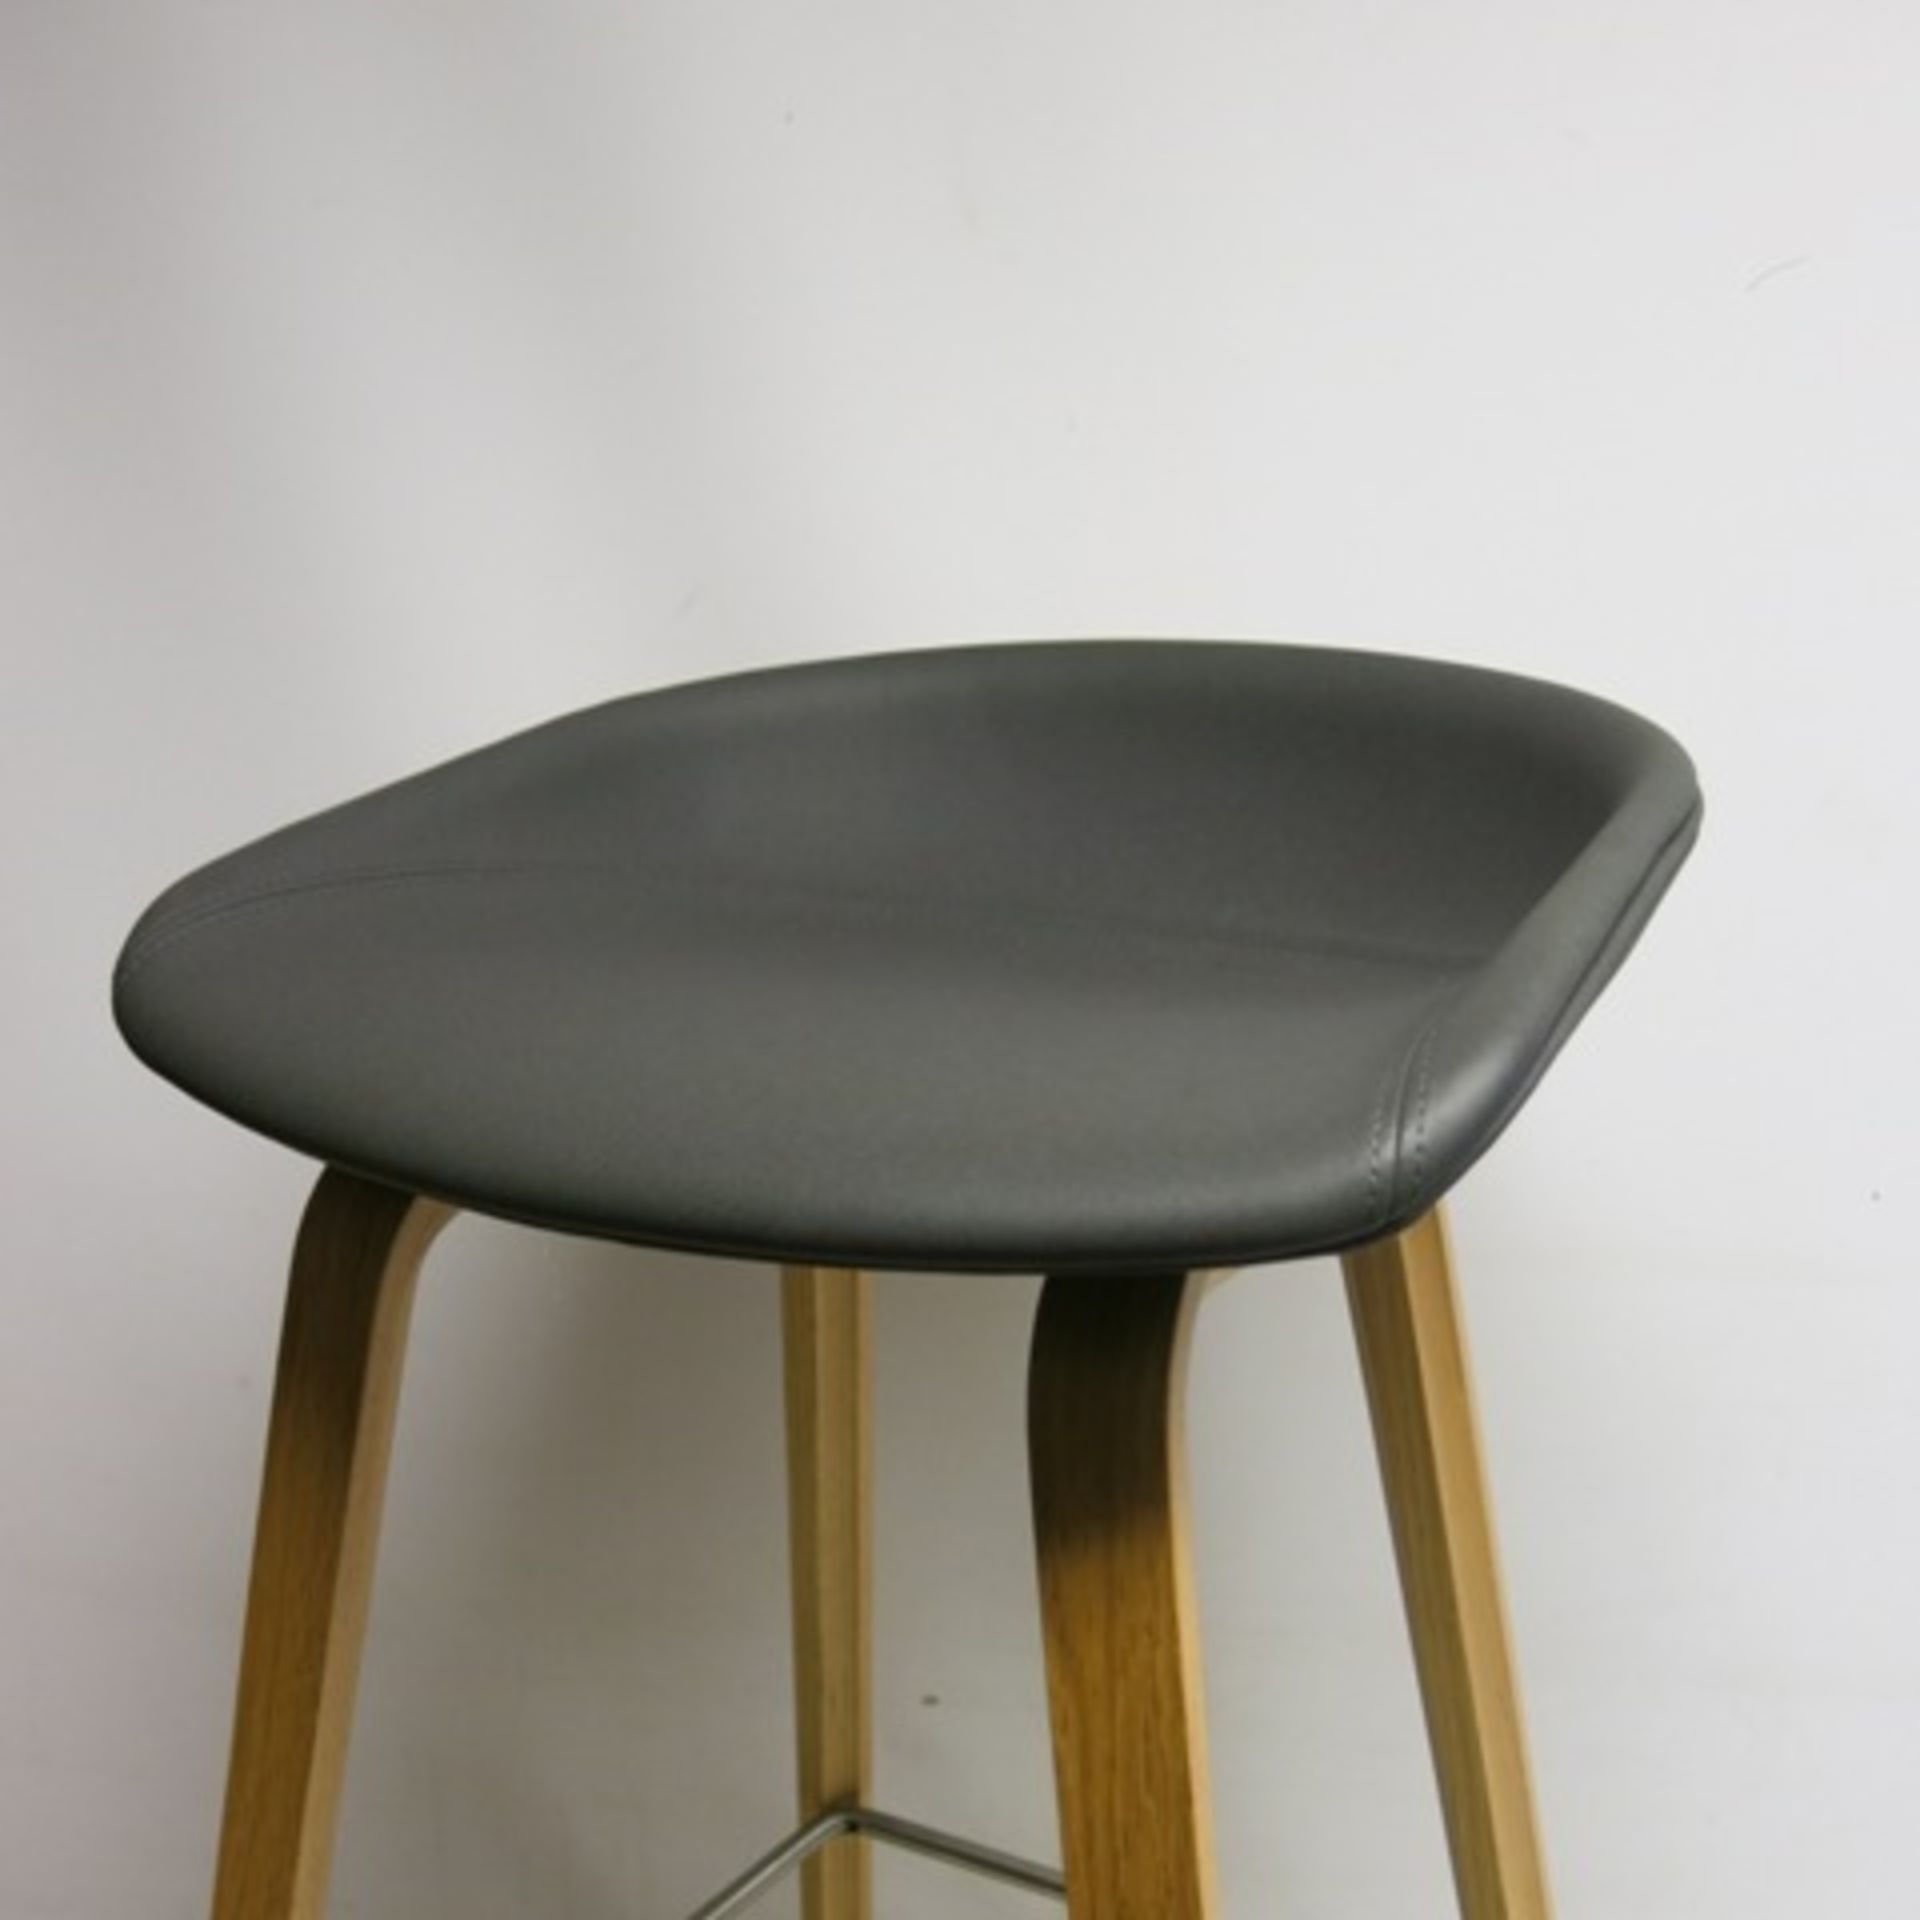 Designer 'Hay' About A Stool Model AAS32 High Stool in Matt Lacquered Oak & Charcoal Grey Padded - Bild 2 aus 5